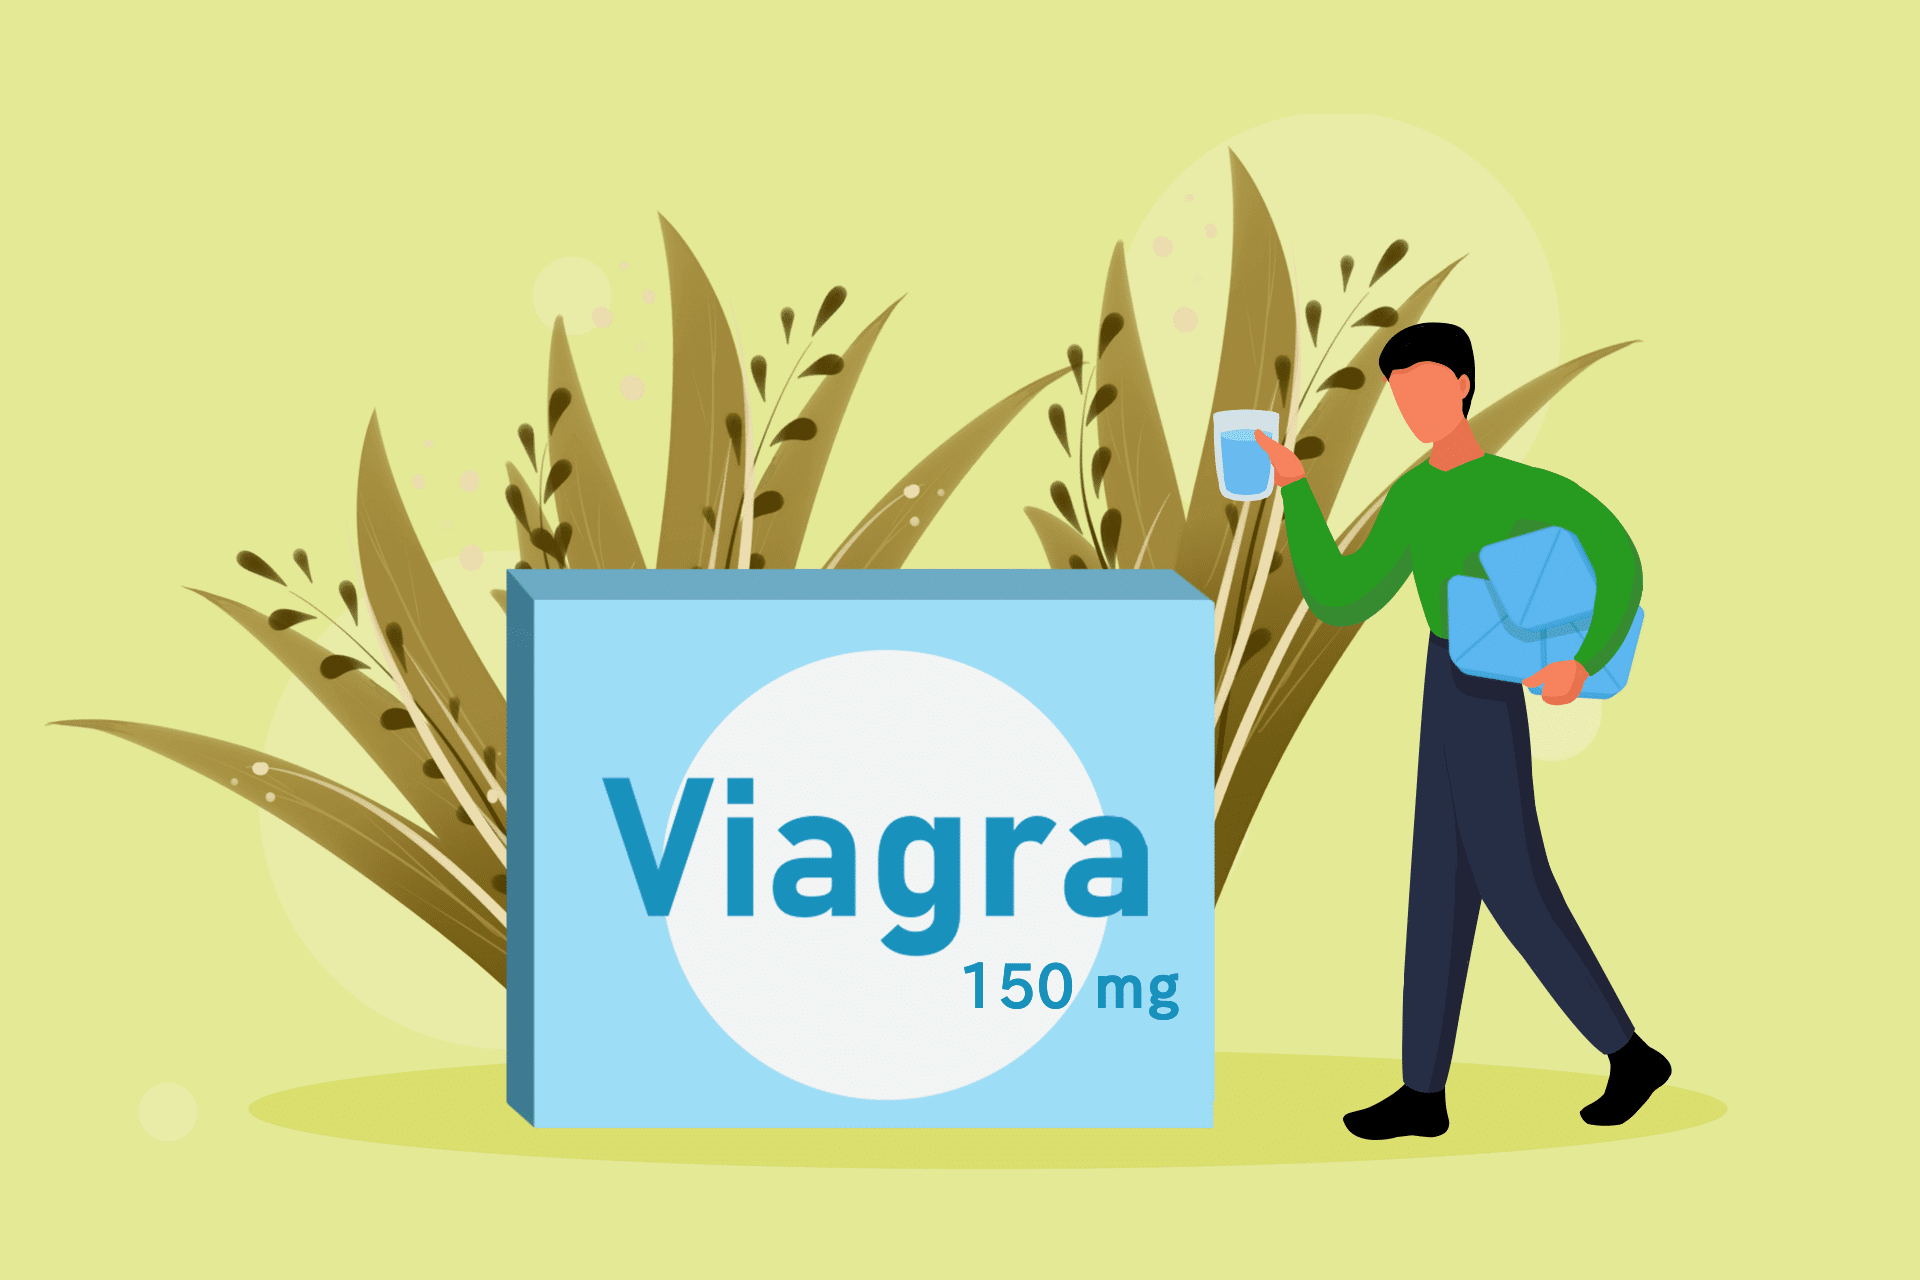 What Happens If You Take 150 MG of Viagra